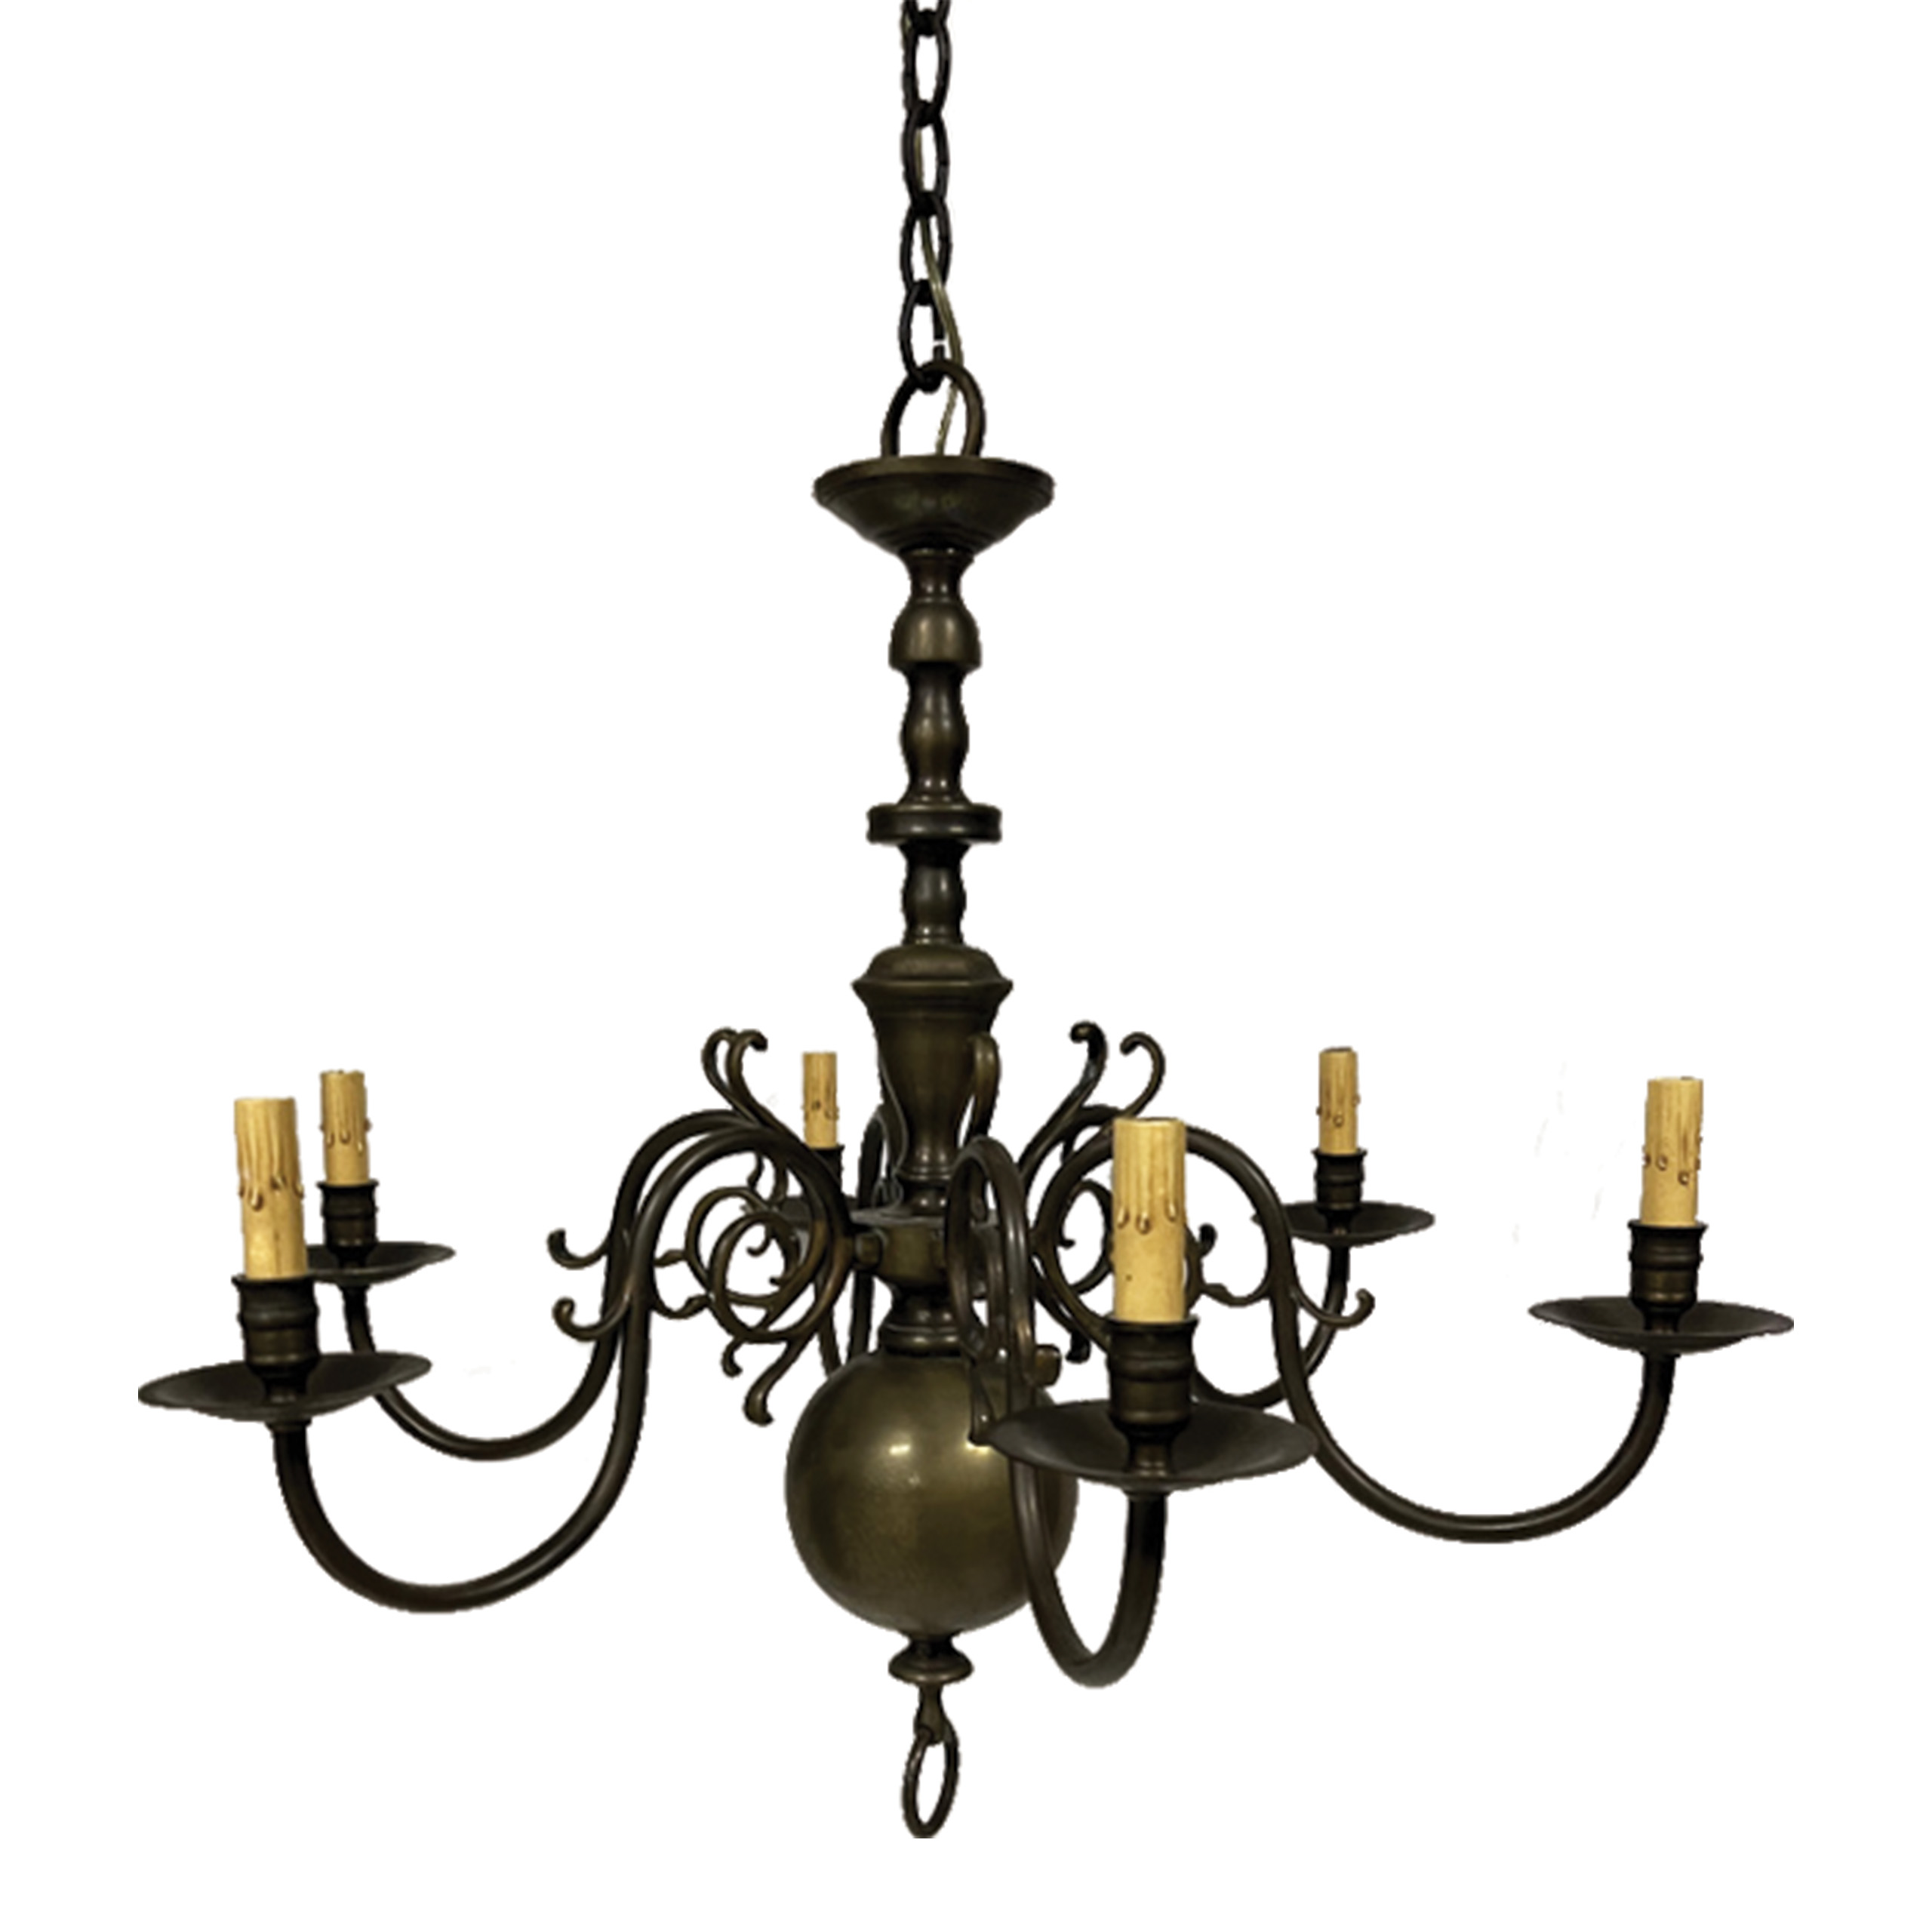 Dutch Antique Brass Chandelier with 6-Arms